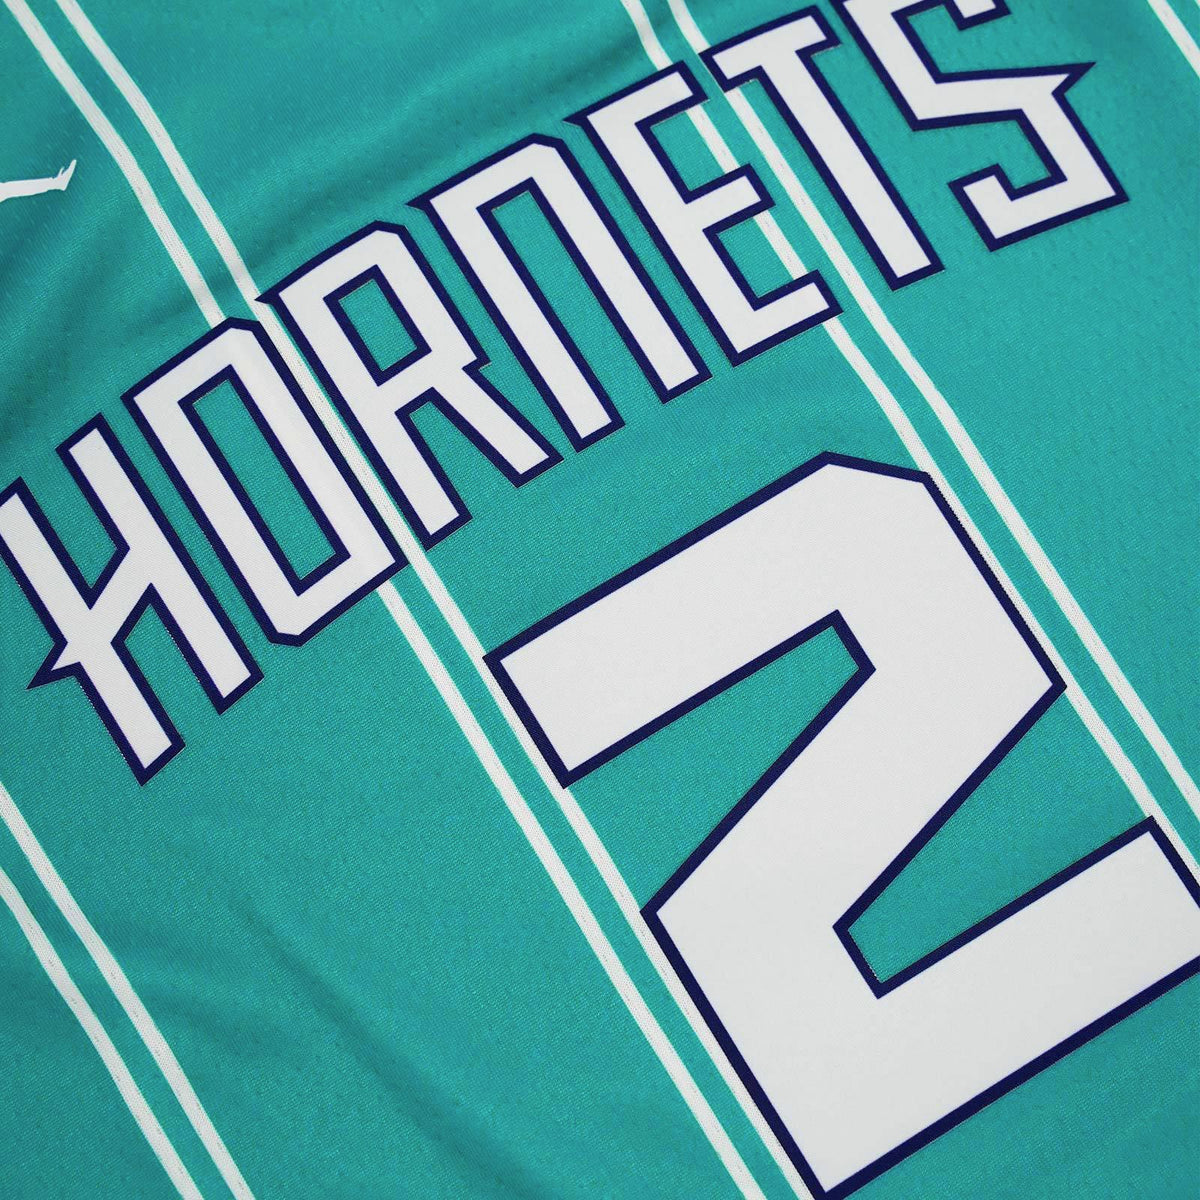 LaMelo Ball Charlotte Hornets Icon Edition Swingman Jersey - Teal -  Throwback